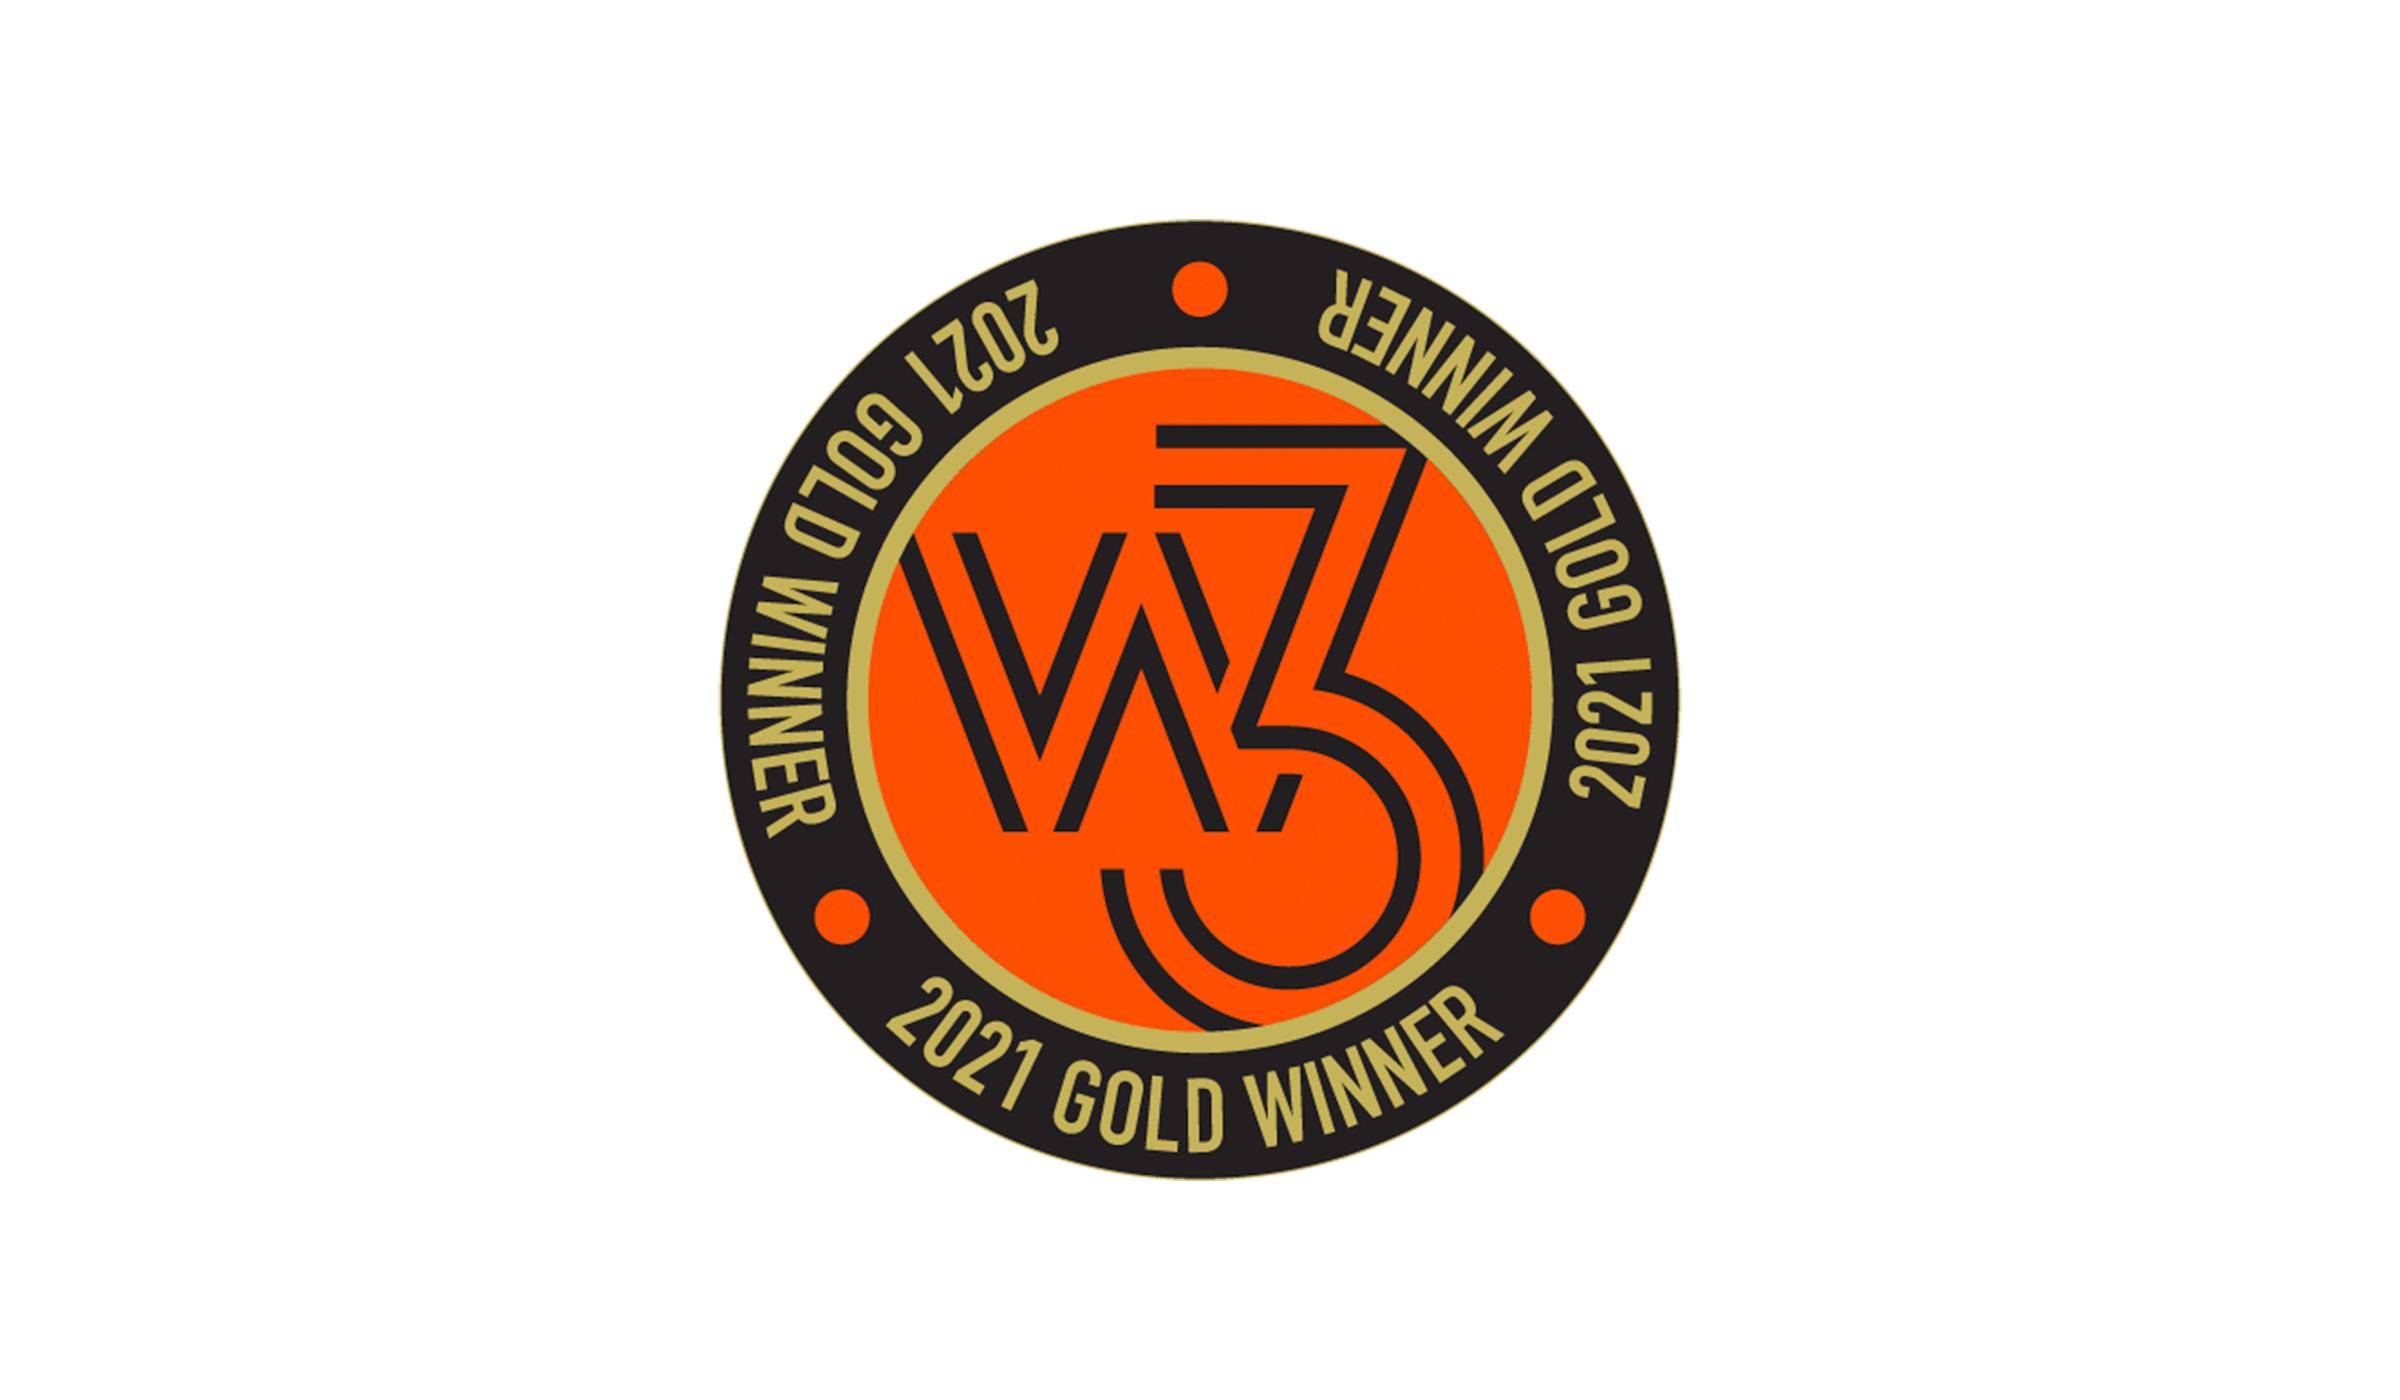 PMC Podcast Wins Gold in the w3 Awards